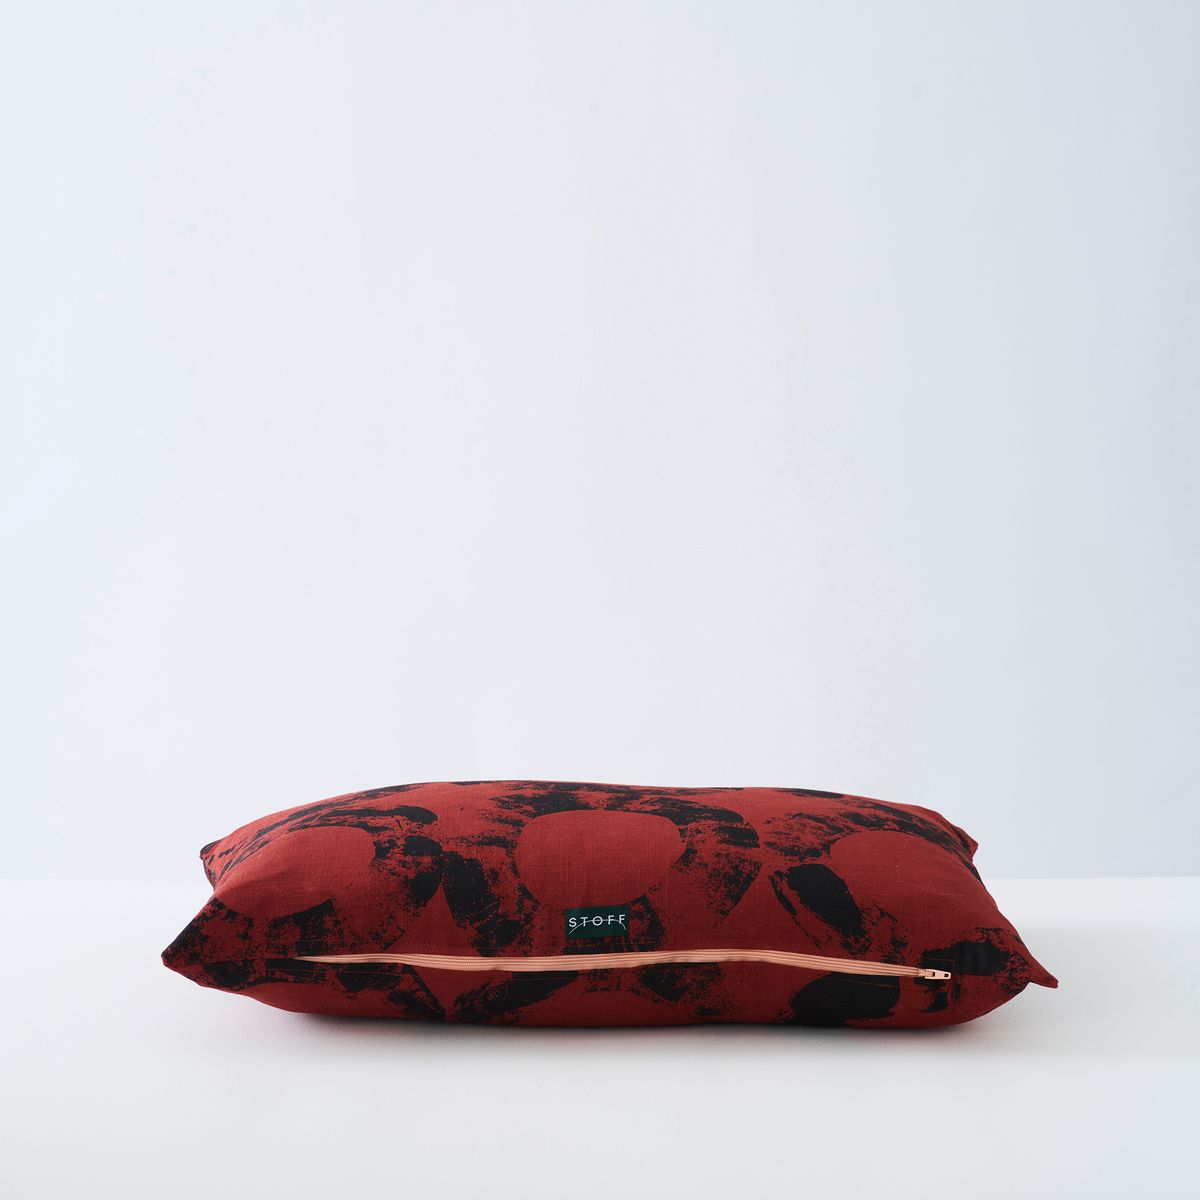 Circul Duck Feather Cushion (Available in 3 colours)